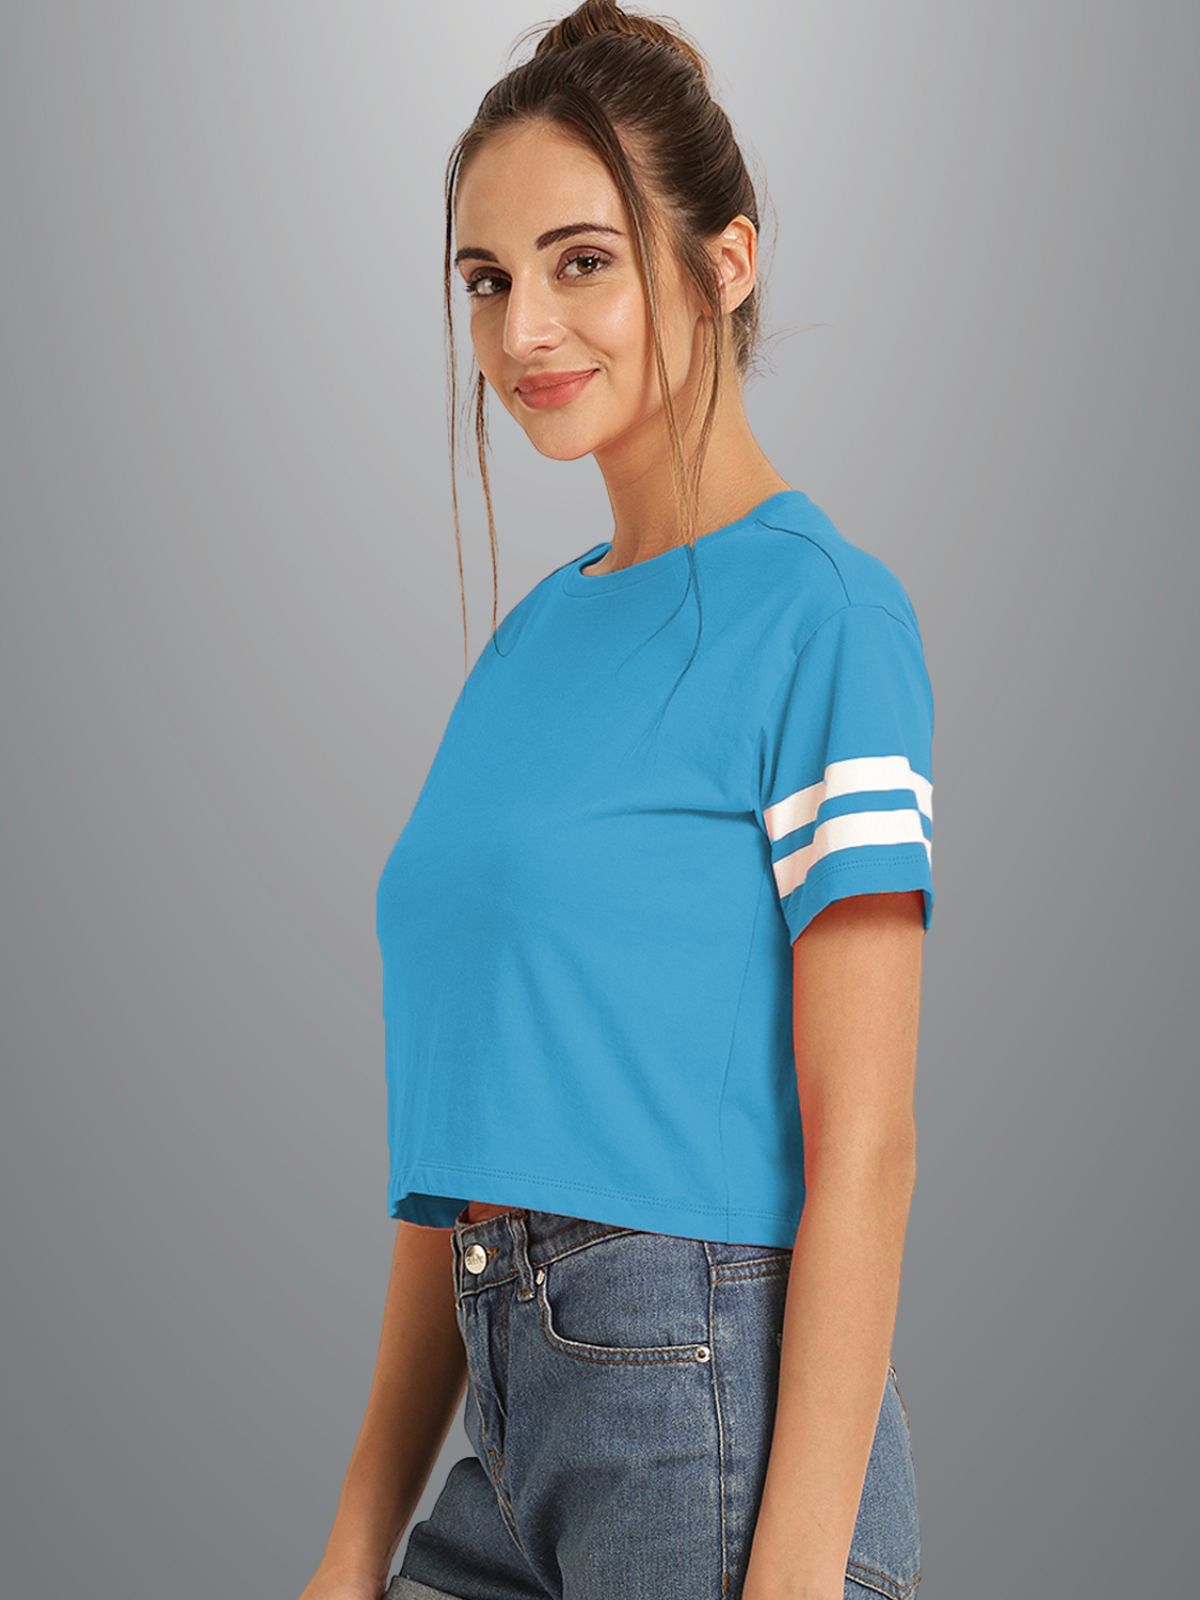 Womens Solid Sky Blue Cotton Crop Top With Designer White Stripe